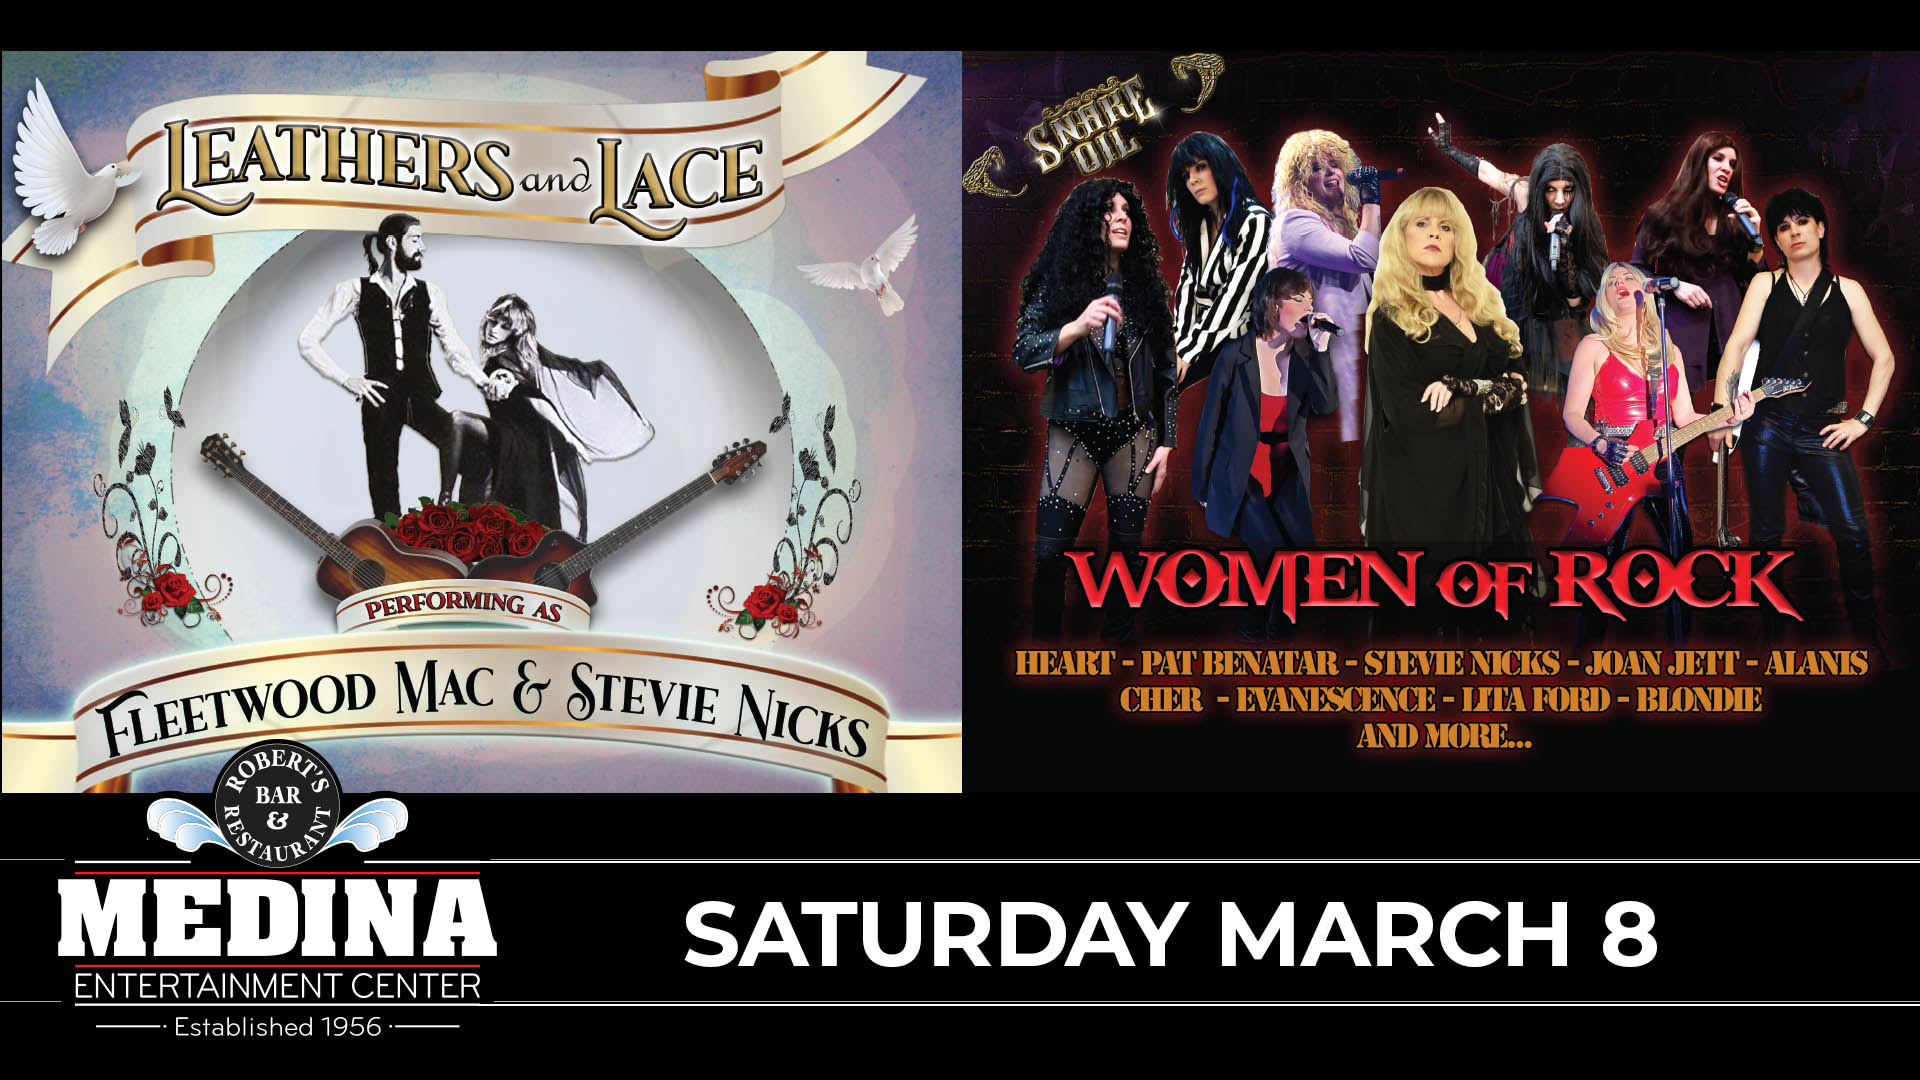 Leathers & Lace: A Tribute To Fleetwood Mac + The Women Of Rock Medina Entertainment Center Saturday, March 18, 2023 Doors: 7:00PM | Music: 8:00PM | 21+ Tickets on-sale Friday, January 13 at 11am Tickets: $30 (Gold Seating), $25 (Silver Seating) & $20 (GA Seating) plus applicable fees